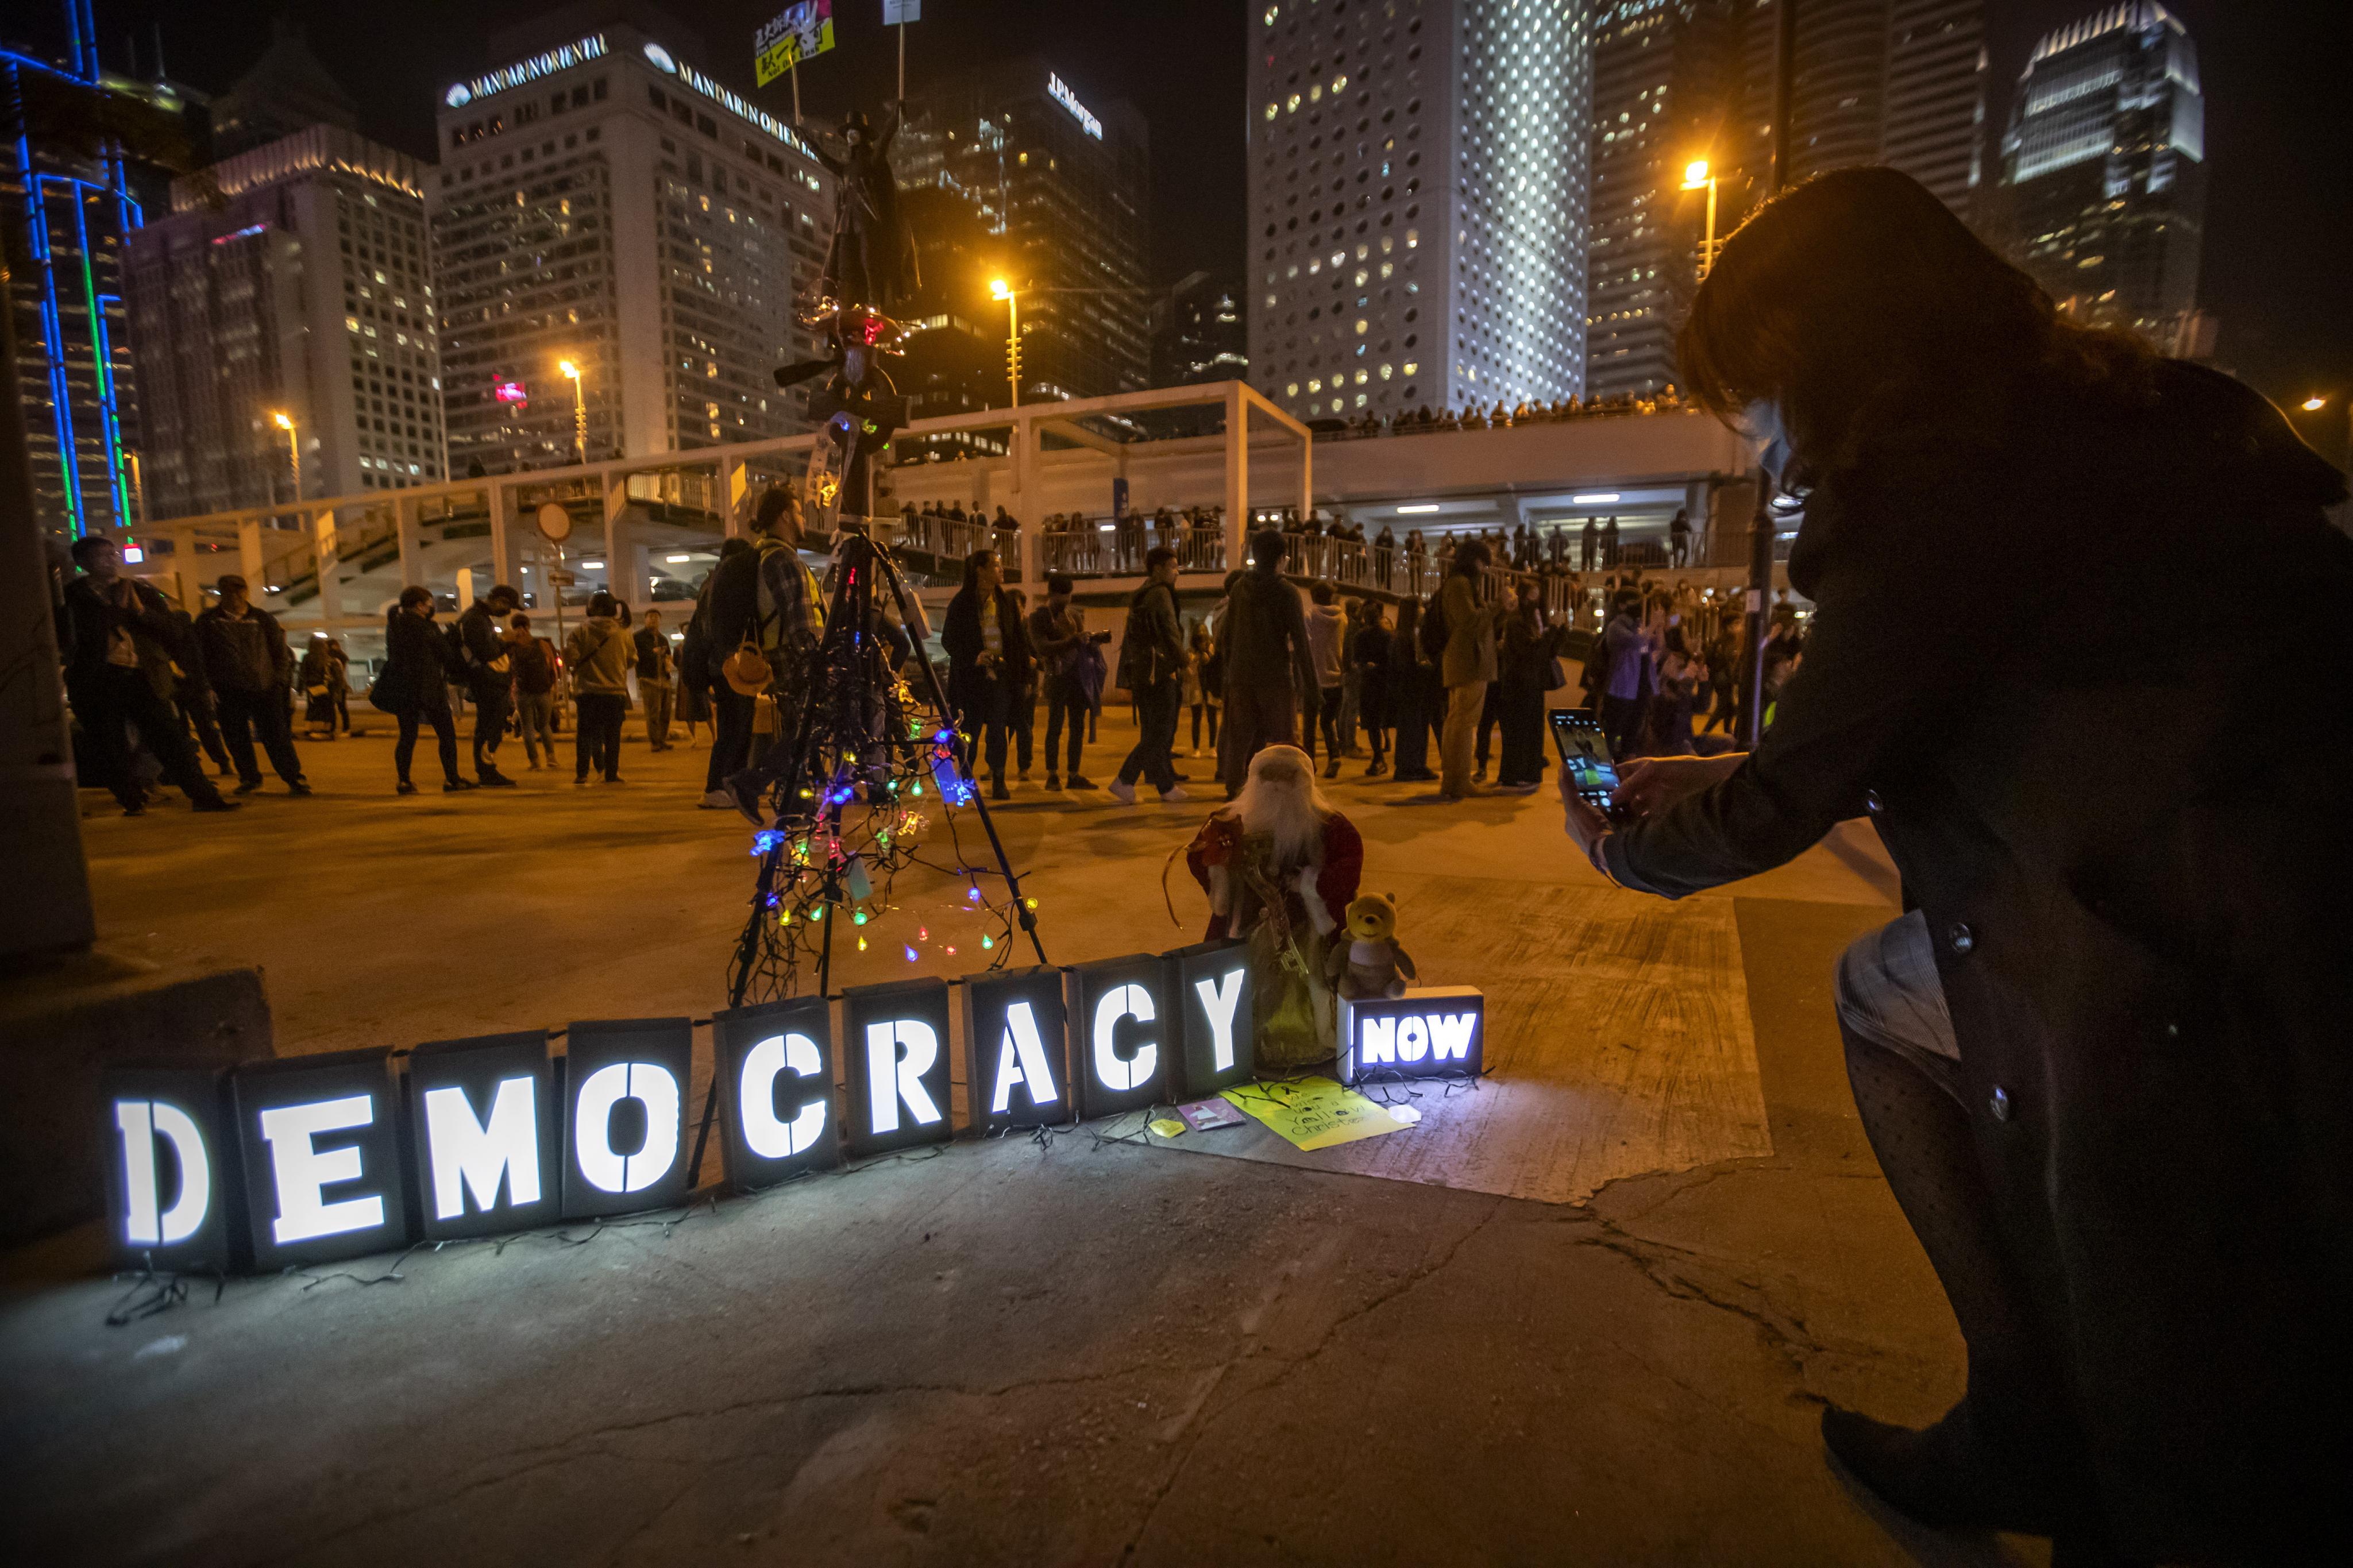 Hong Kongers have been rallying for civic liberties for many months